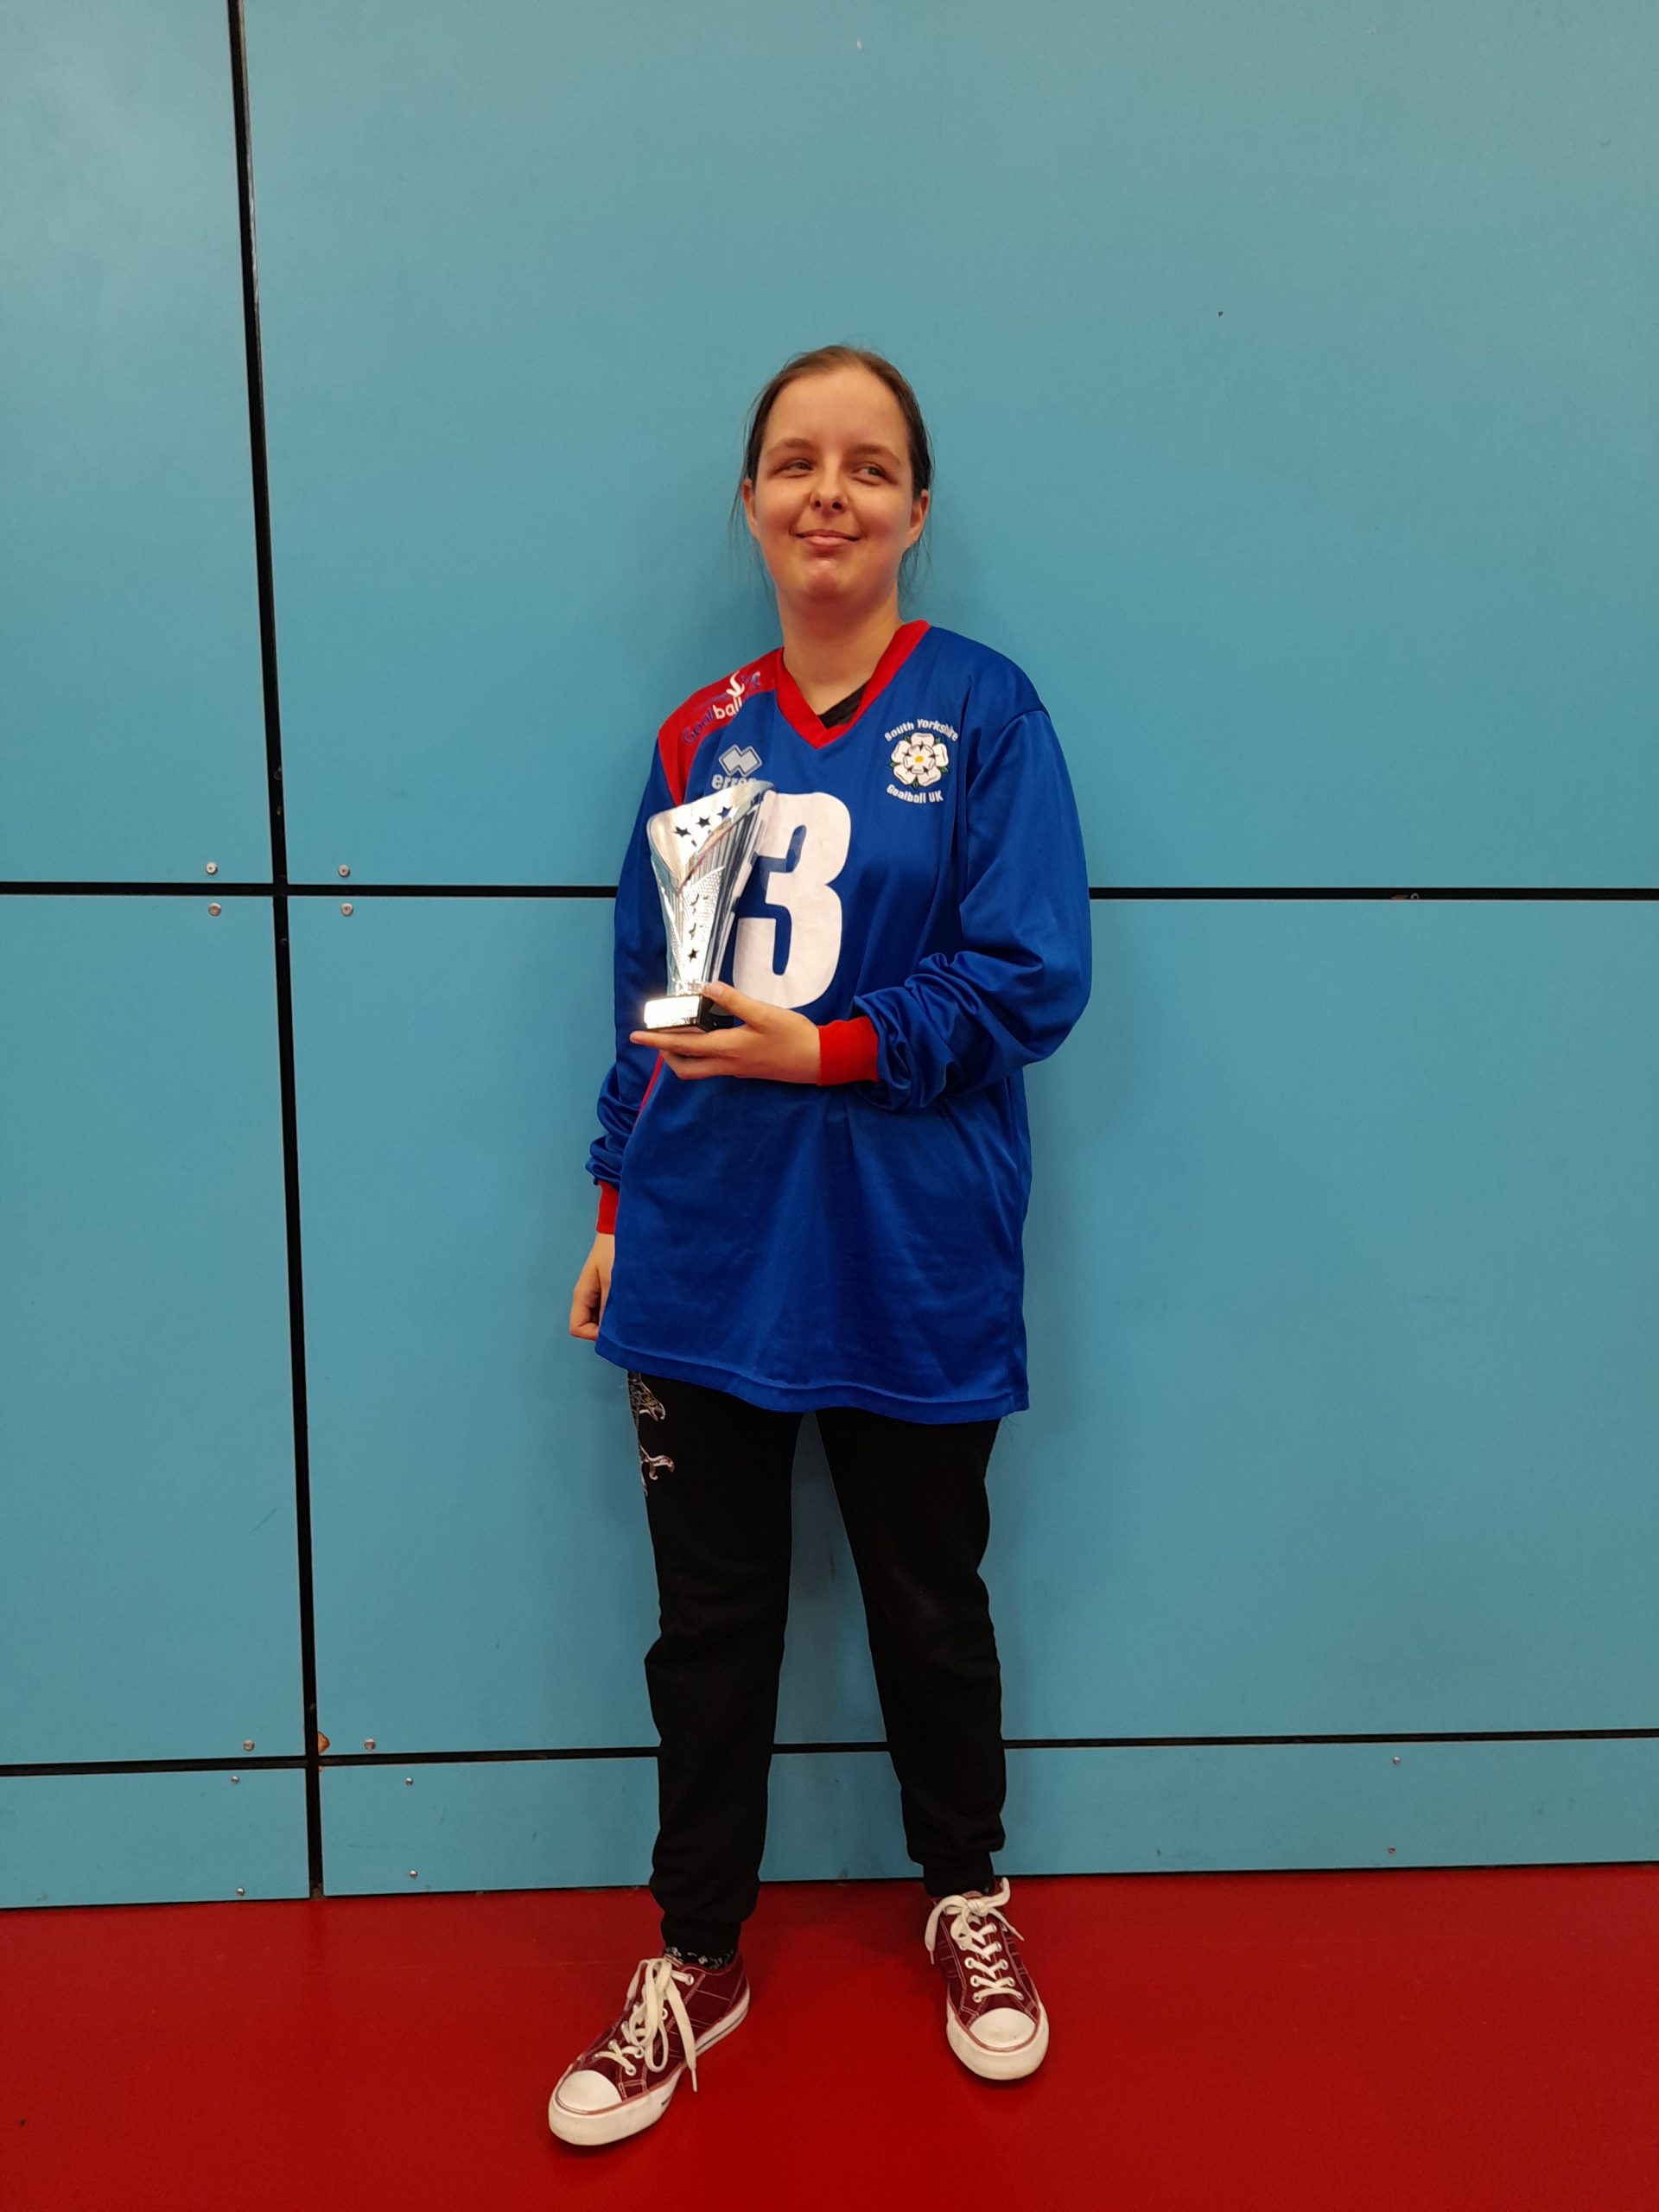 Klaudia Orgel standing in a blue South Yorkshire goalball jersey, and black tracksuit bottoms holding a silver trophy.